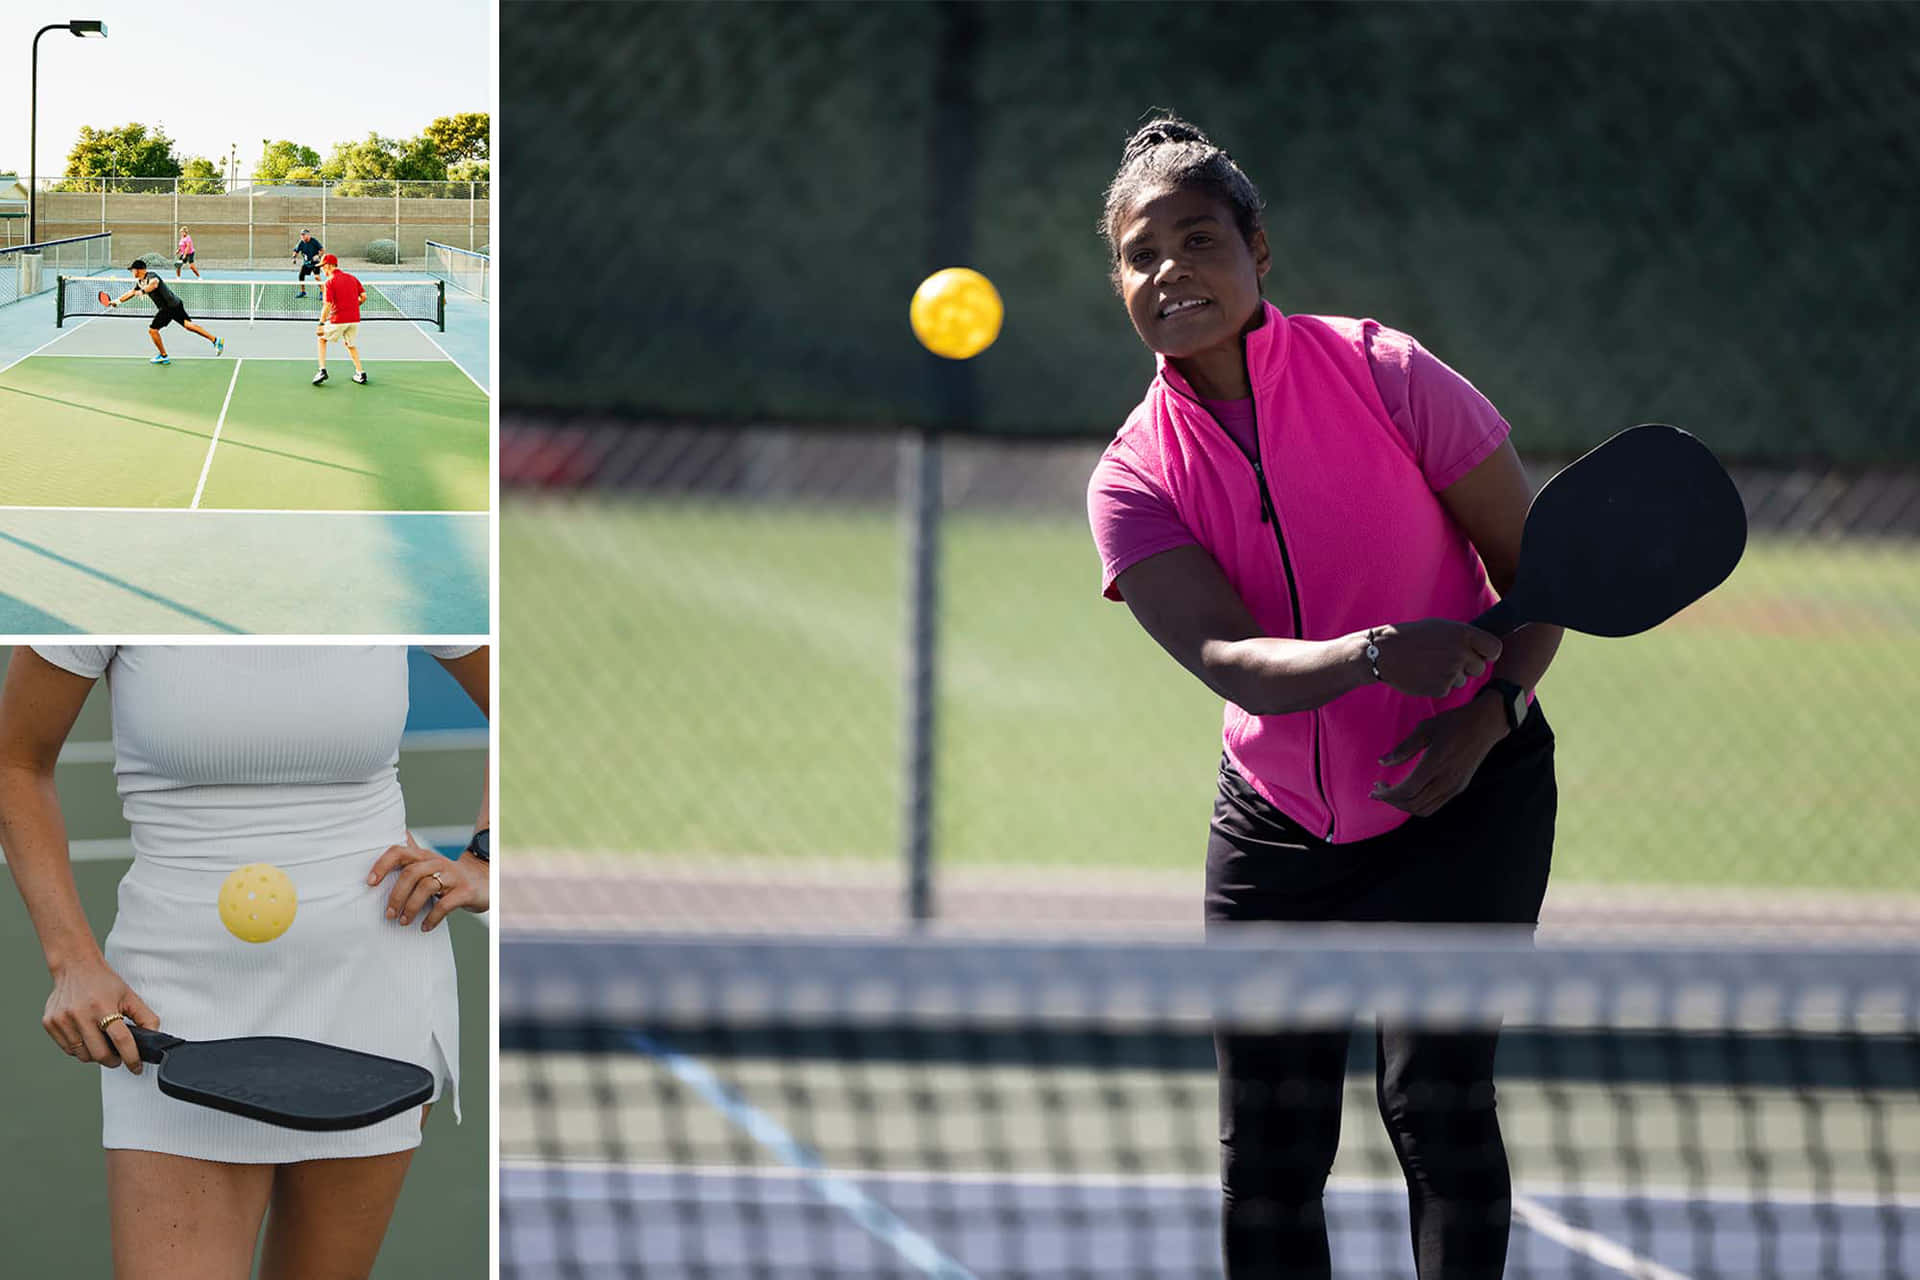 A Collage Of Pictures Of Women Playing Tennis